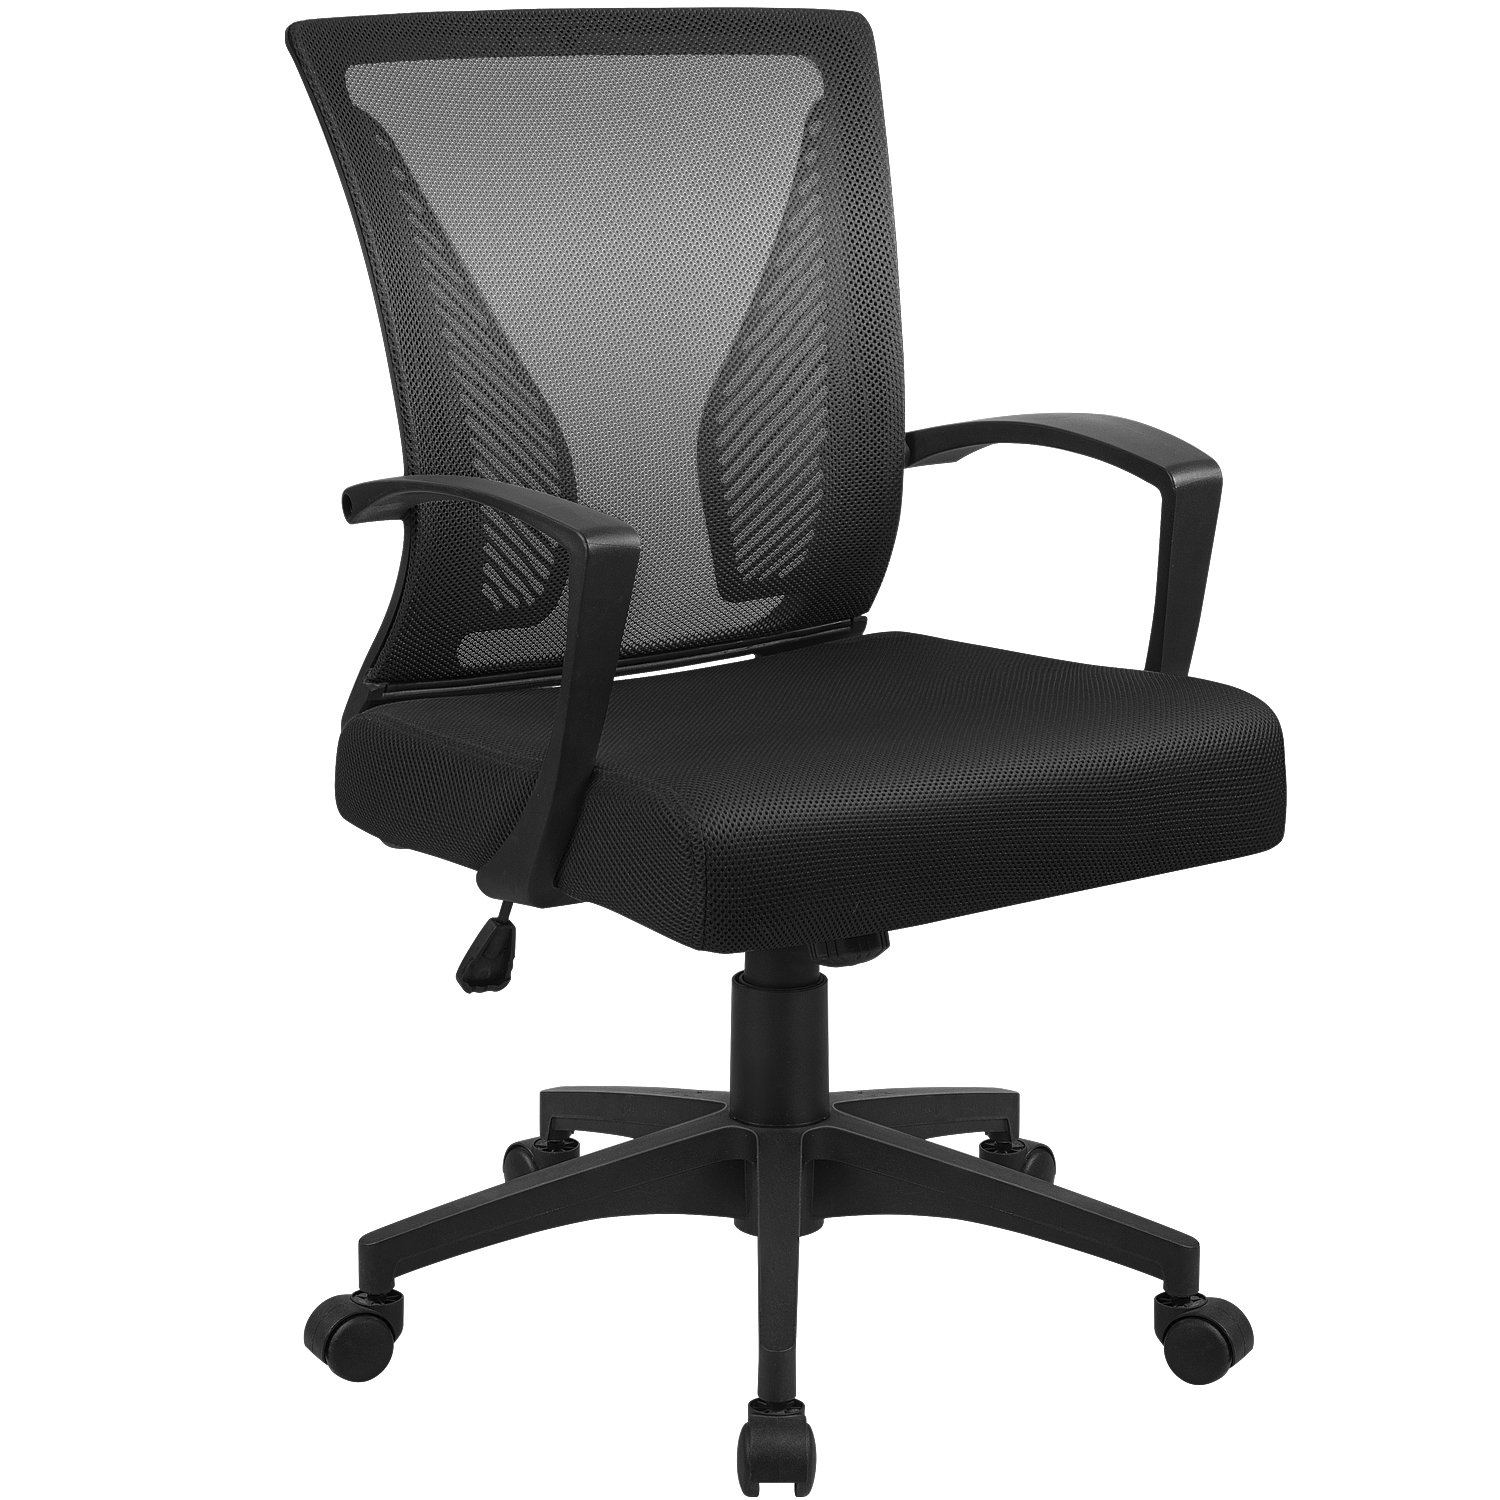 Furmax Manager's Chair with Swivel & Lumbar Support, 265 lb. Capacity, Black - image 1 of 7